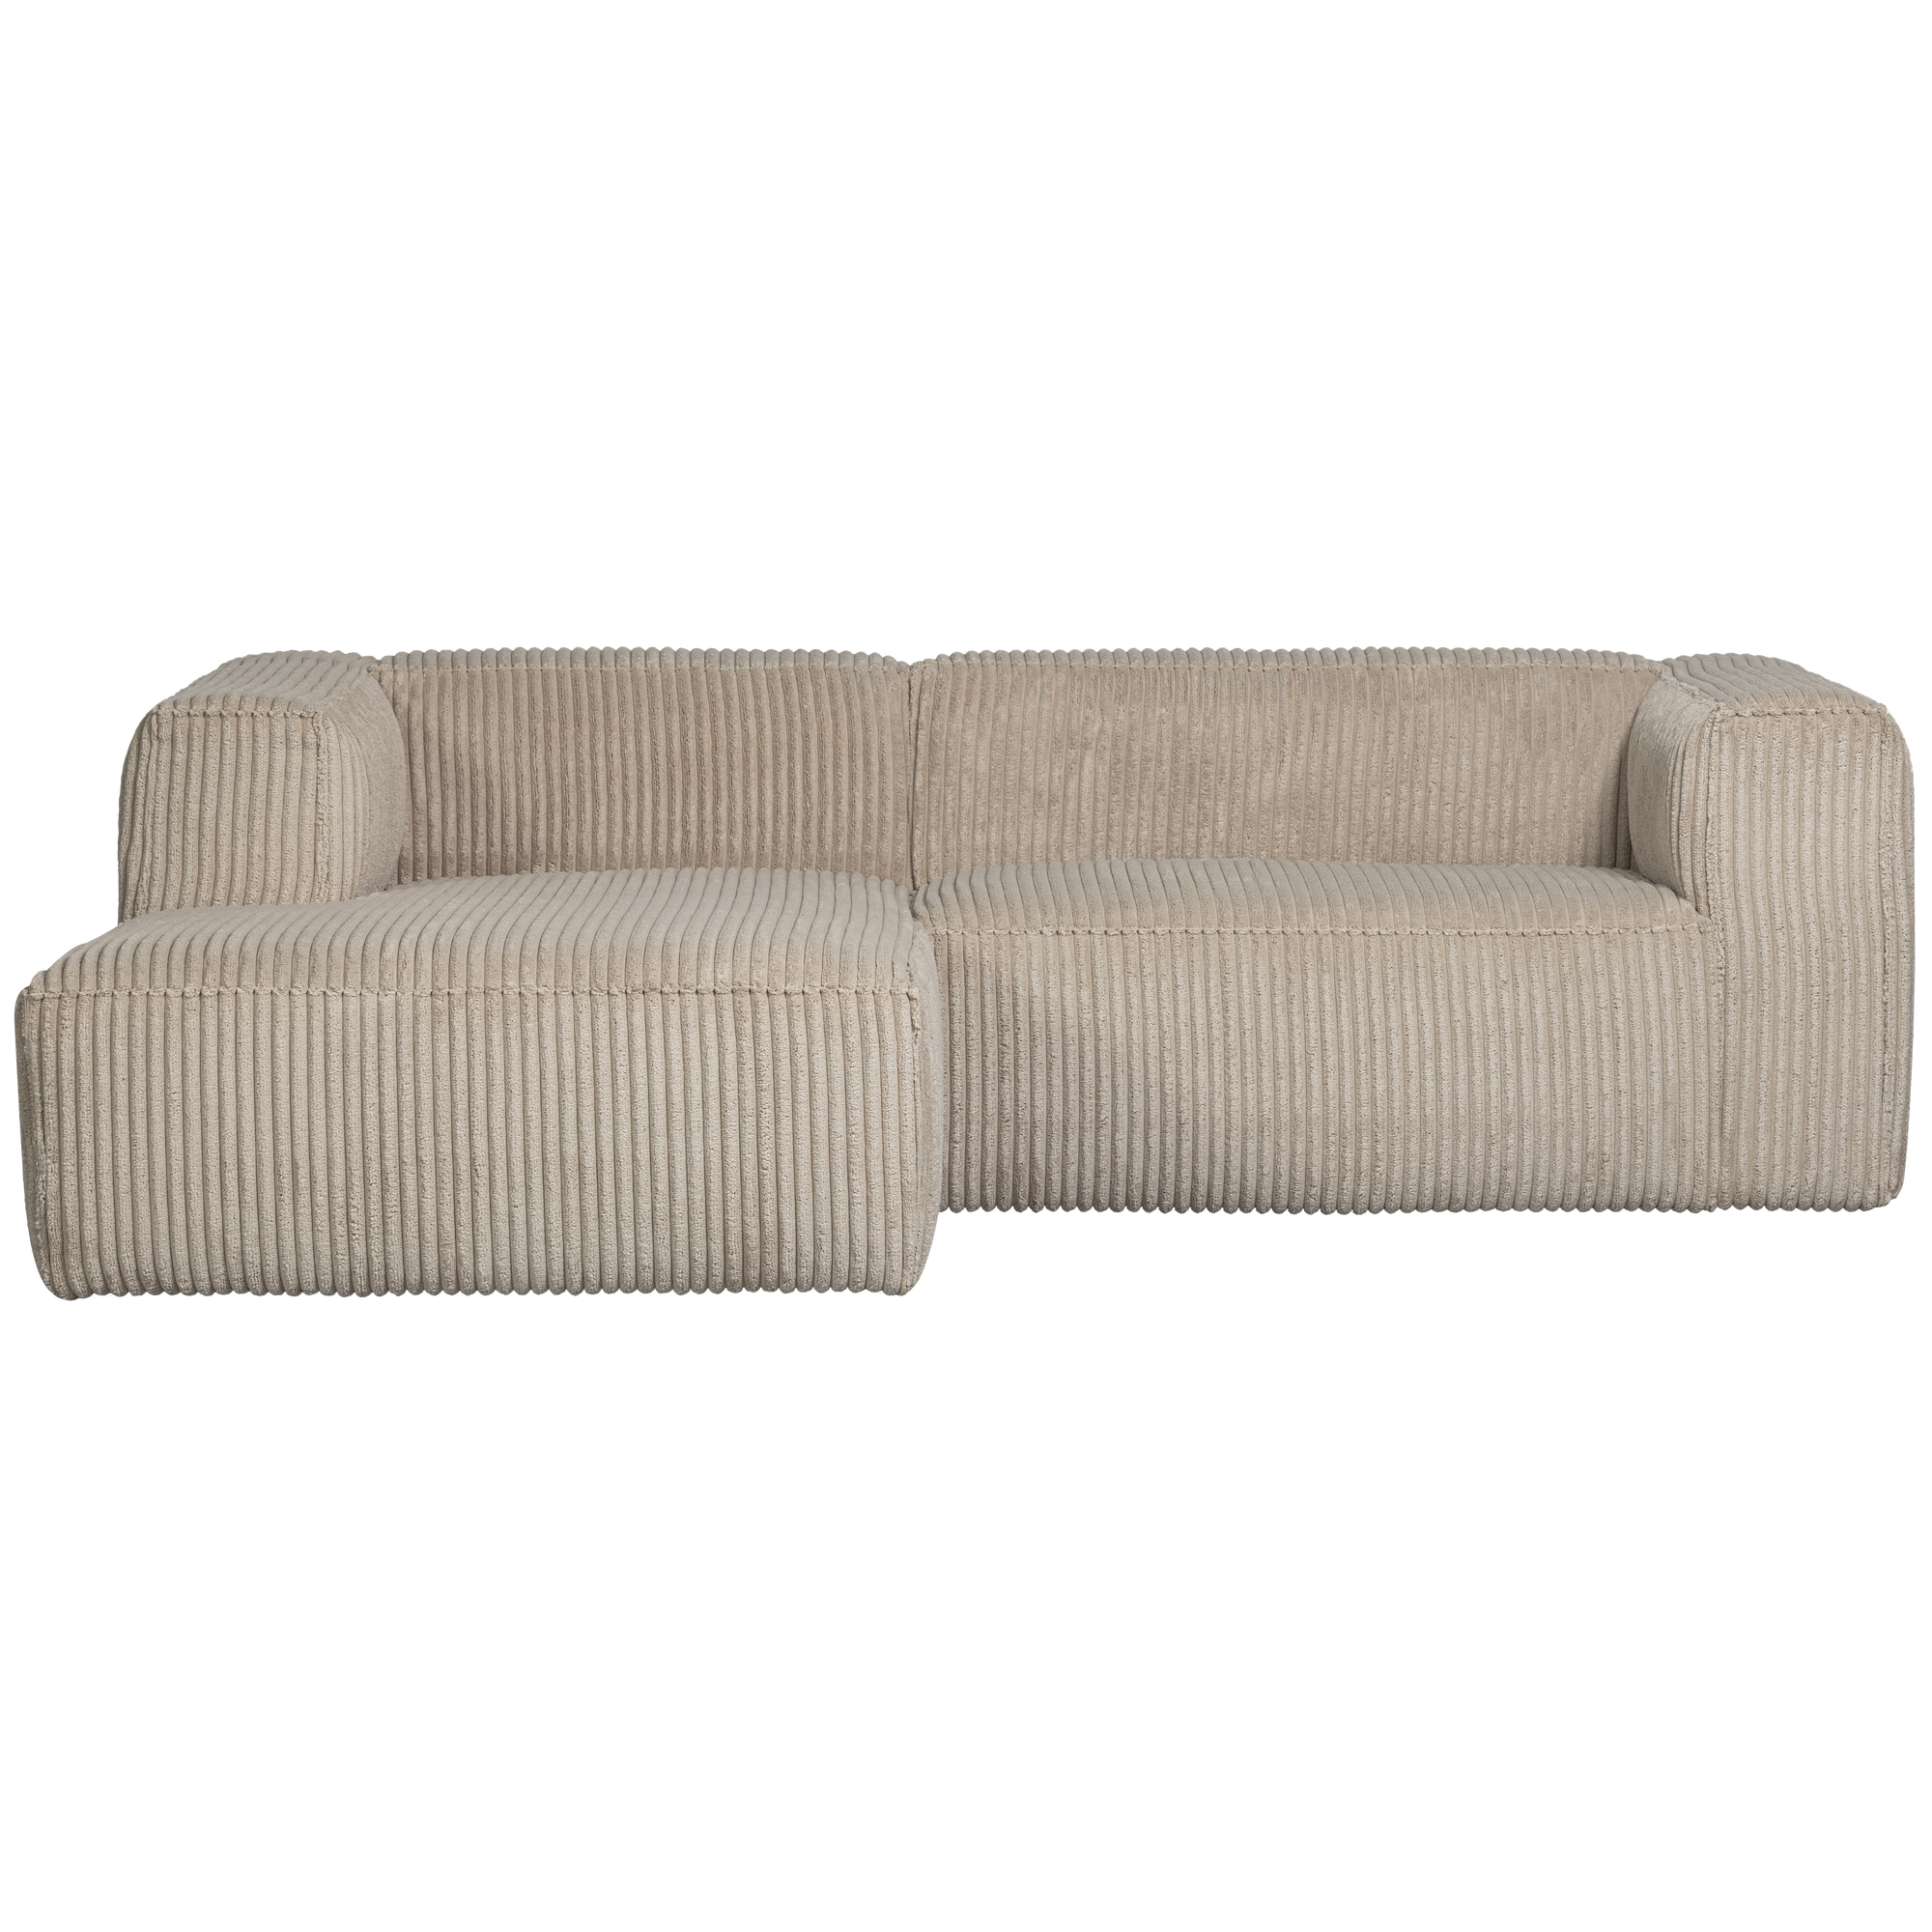 377432-RR-01_VS_WE_Bean_chaise_longue_links_grove_ribstof_travertin.png?auto=webp&format=png&width=2000&height=2000